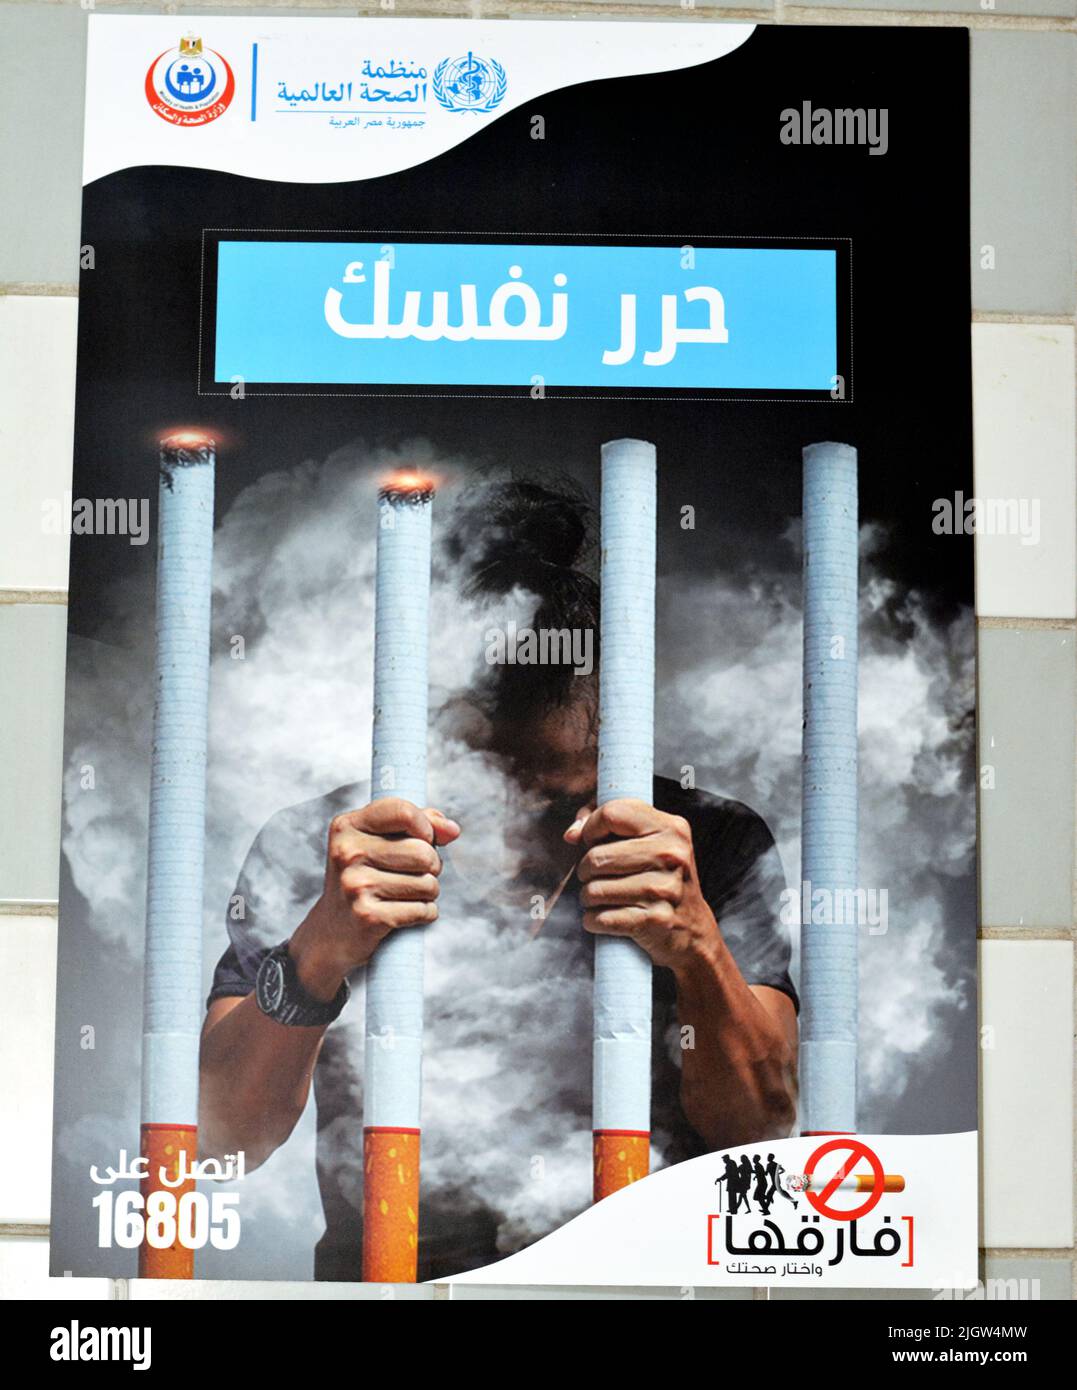 Cairo, Egypt, May 21 2022: A wall banner sticker of an anti smoking campaign by WHO world health organization and Egyptian Ministry of Health, Transla Stock Photo